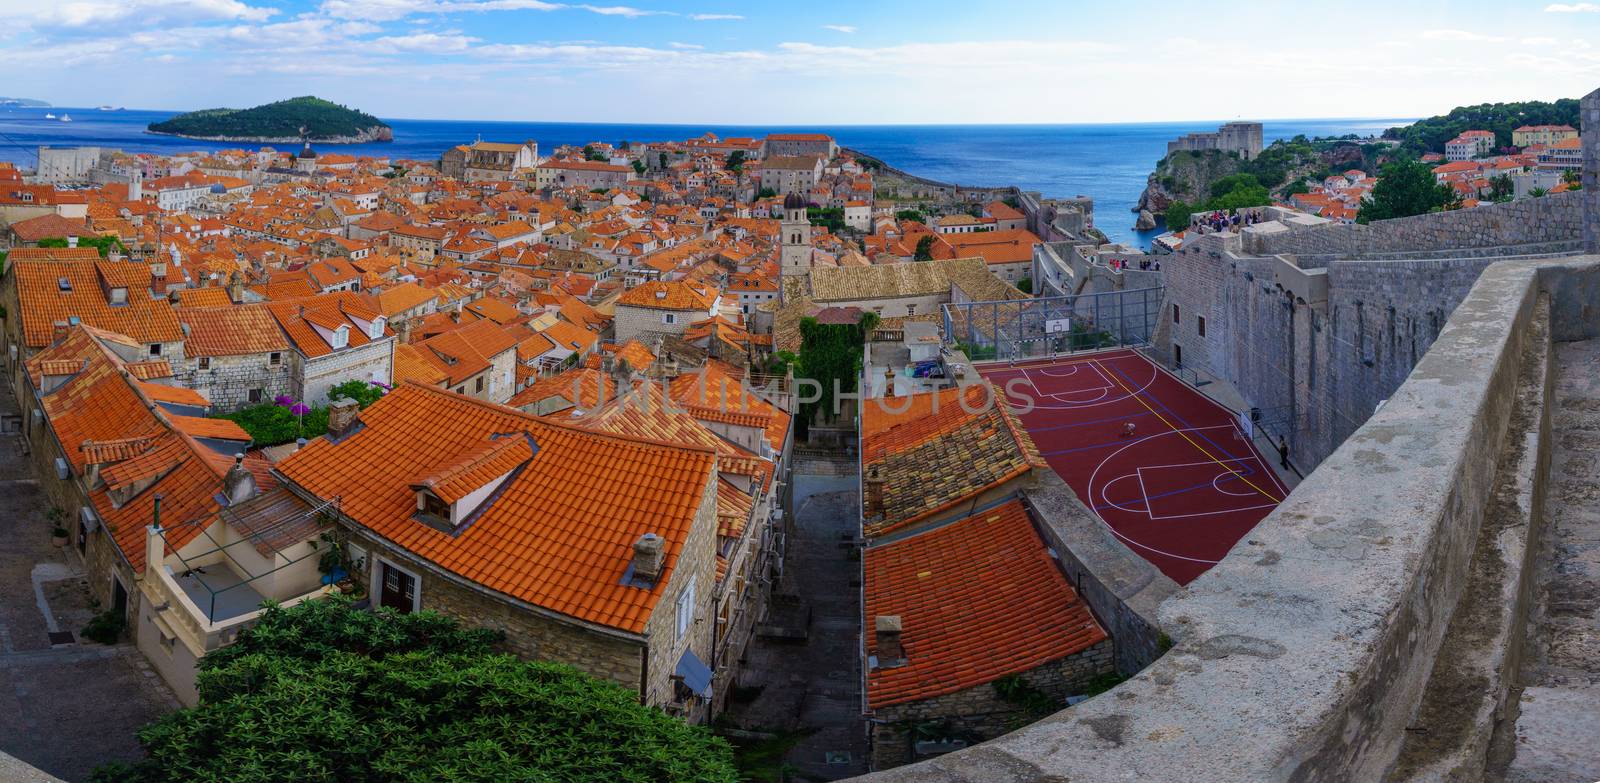 DUBROVNIK, CROATIA - JUNE 26, 2015: Panoramic view of the old city and Lokrum Island, with locals and tourists, in Dubrovnik, Croatia